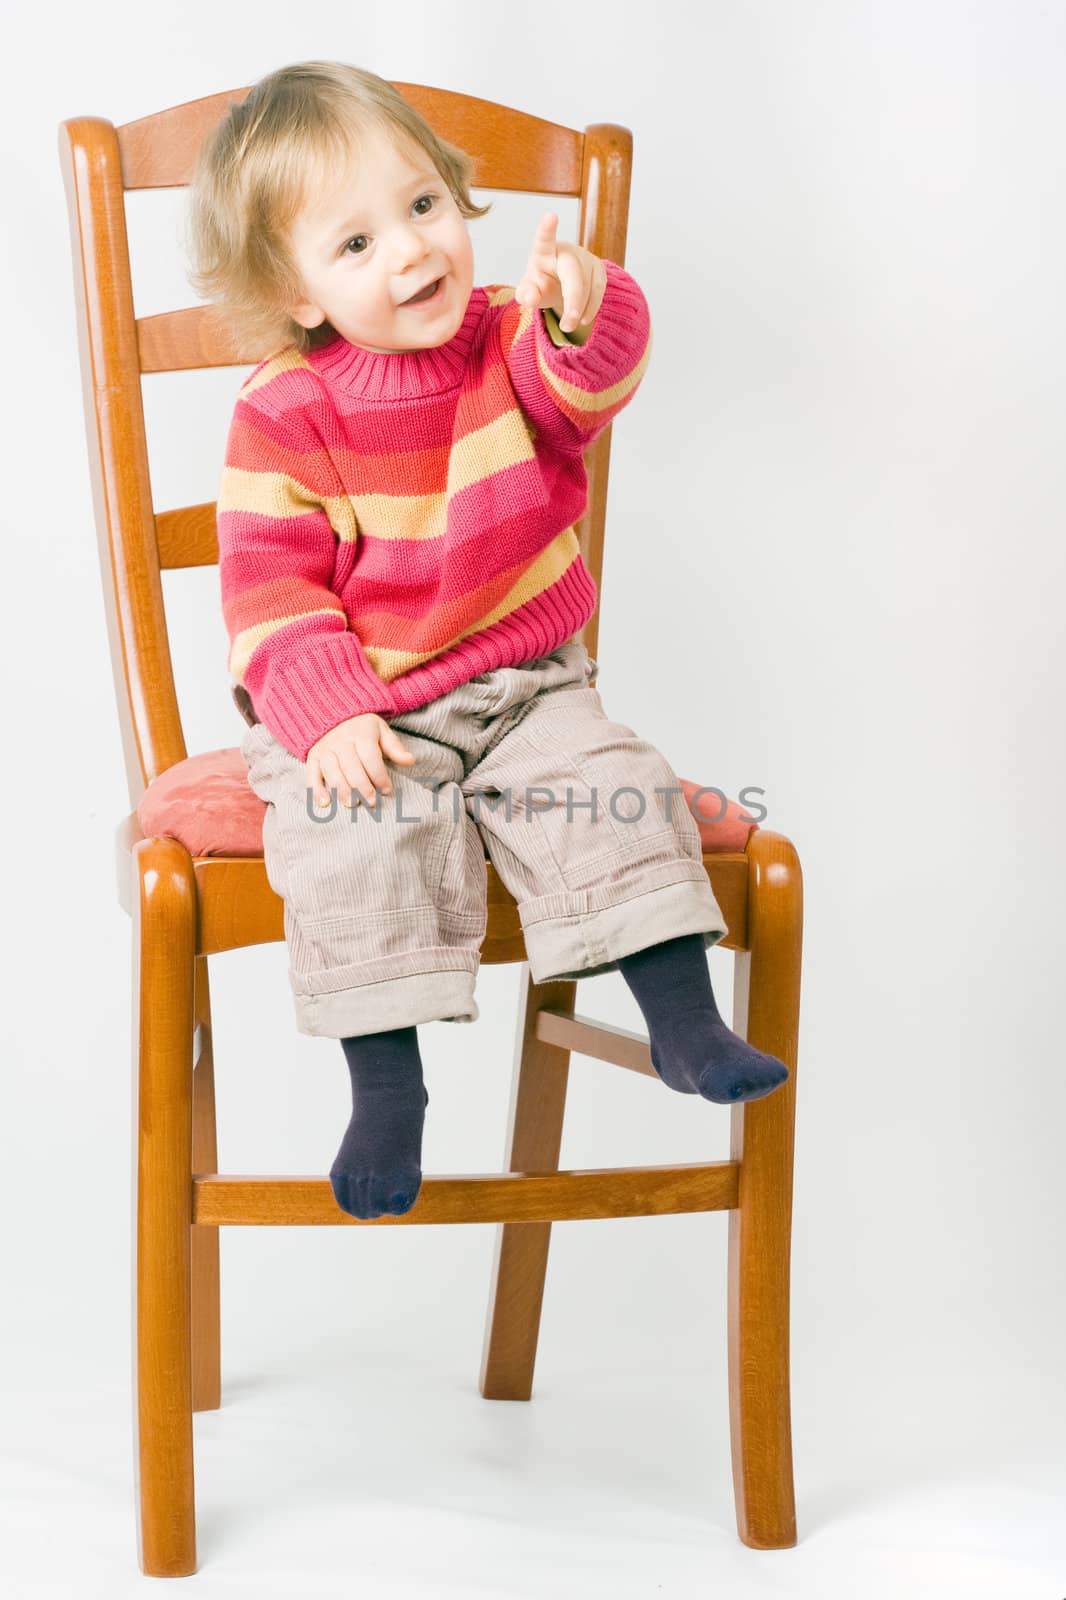 One year old child sitting on a chair